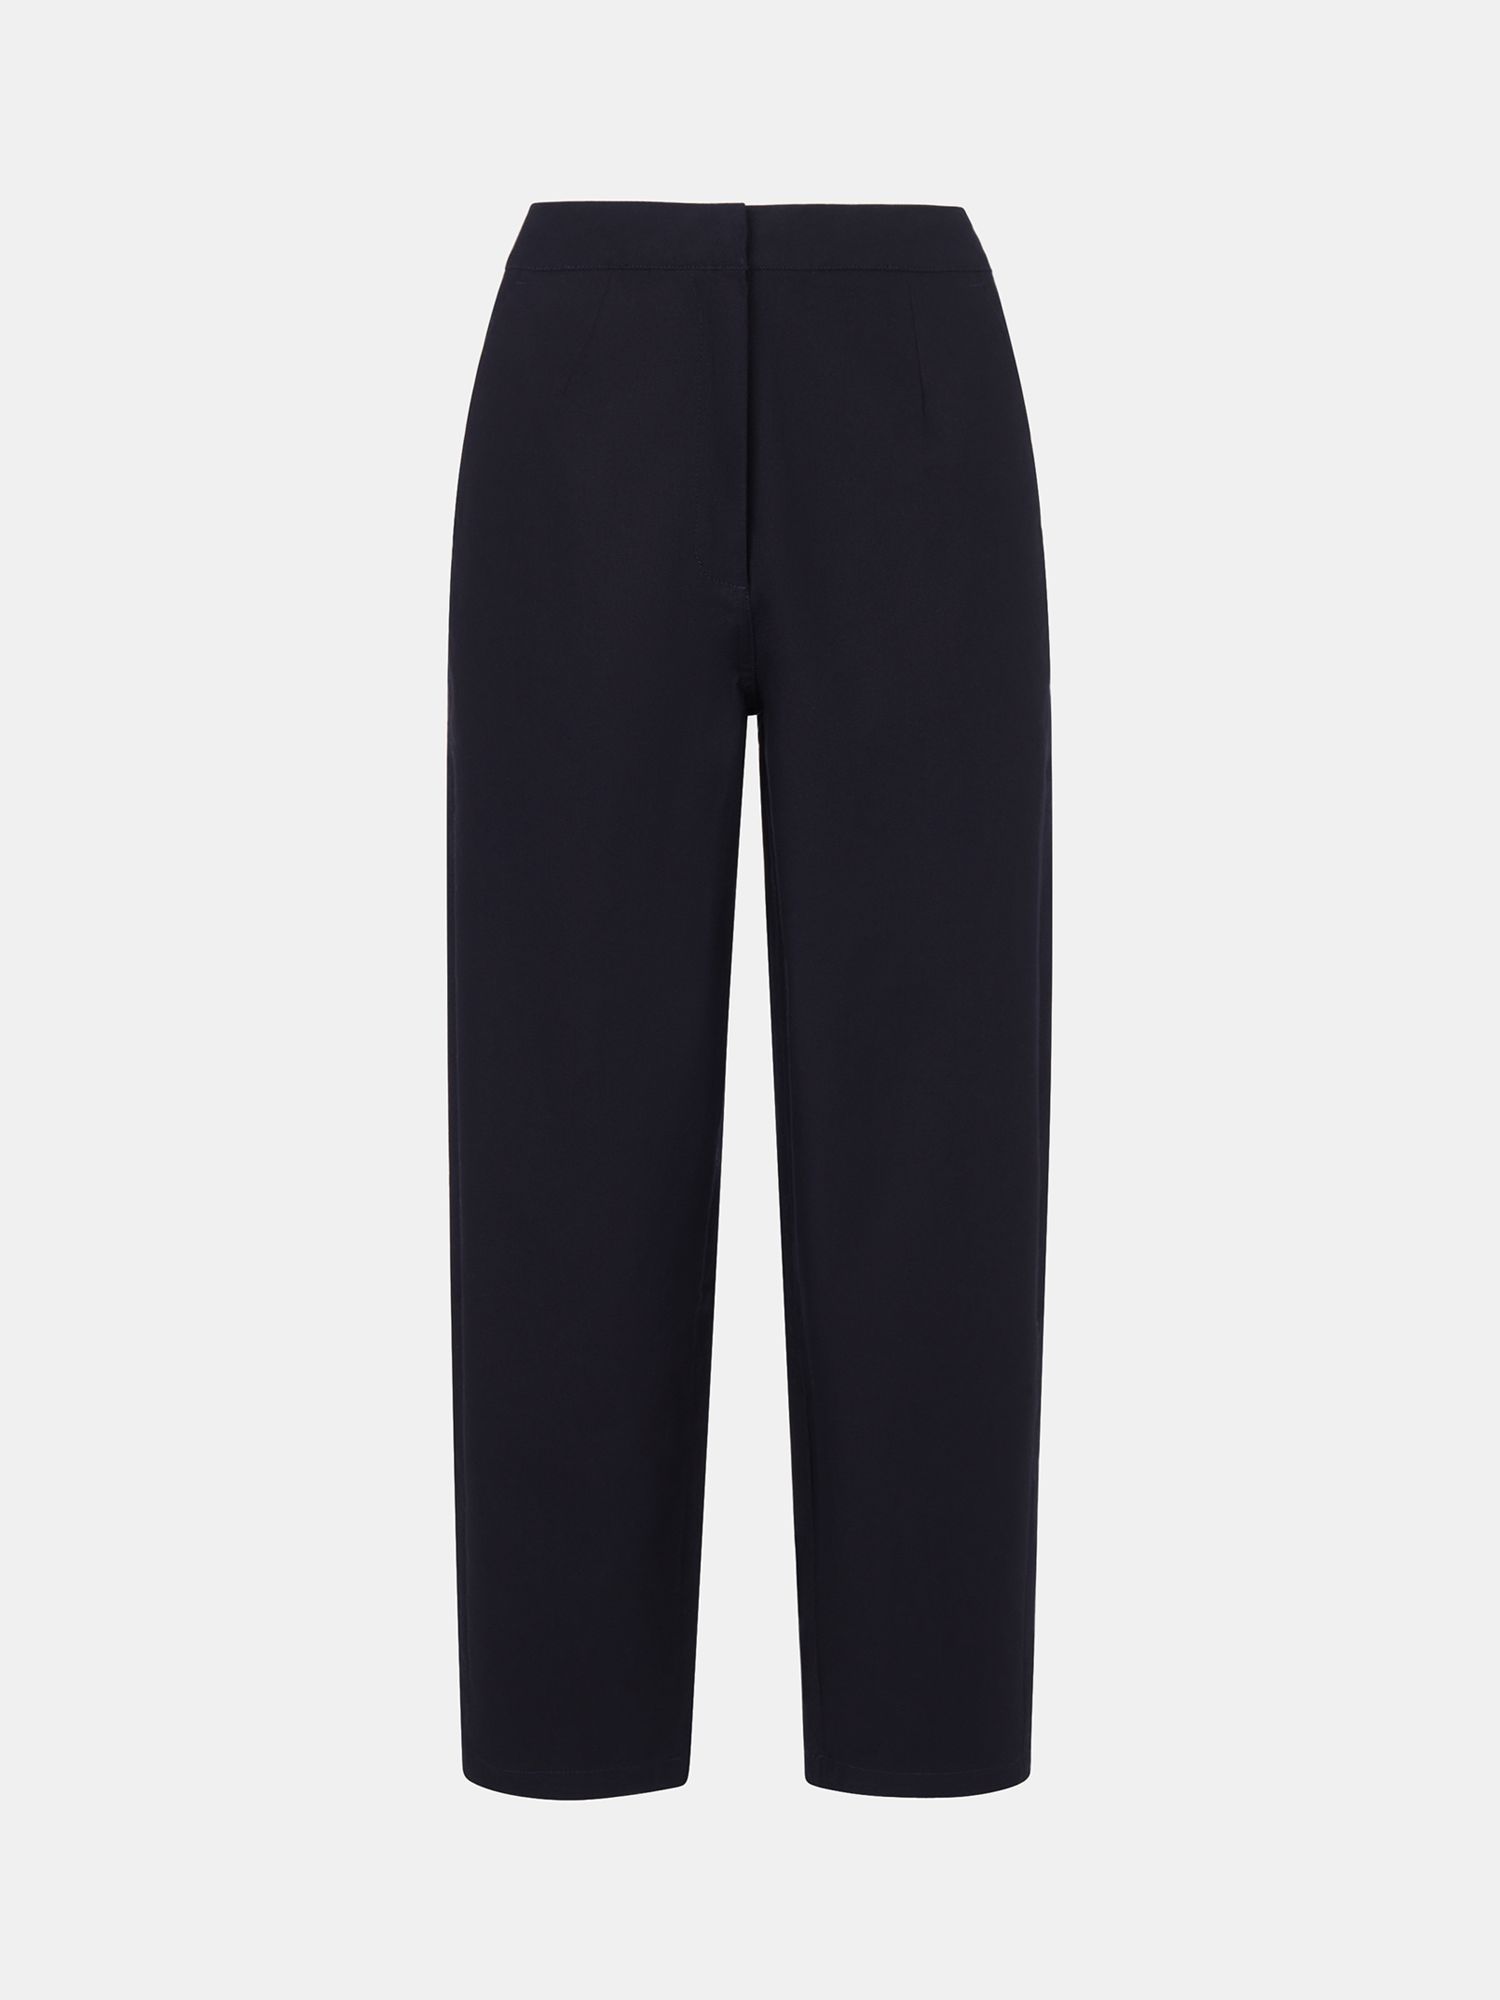 Whistles Carla Barrel Cotton Trousers, Navy at John Lewis & Partners